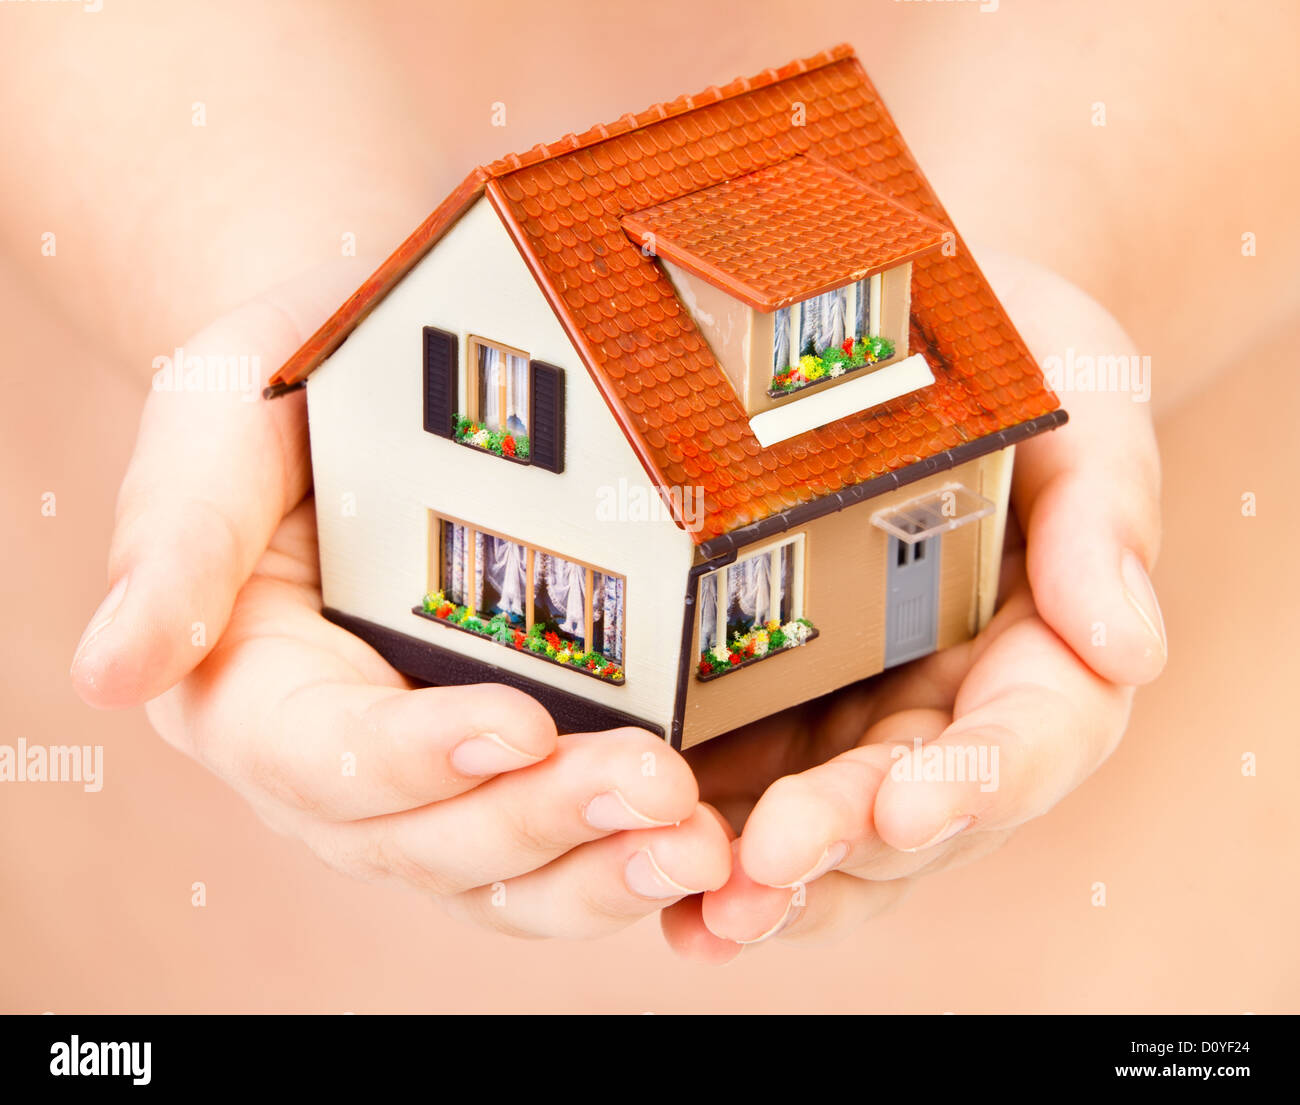 house in human hands Stock Photo